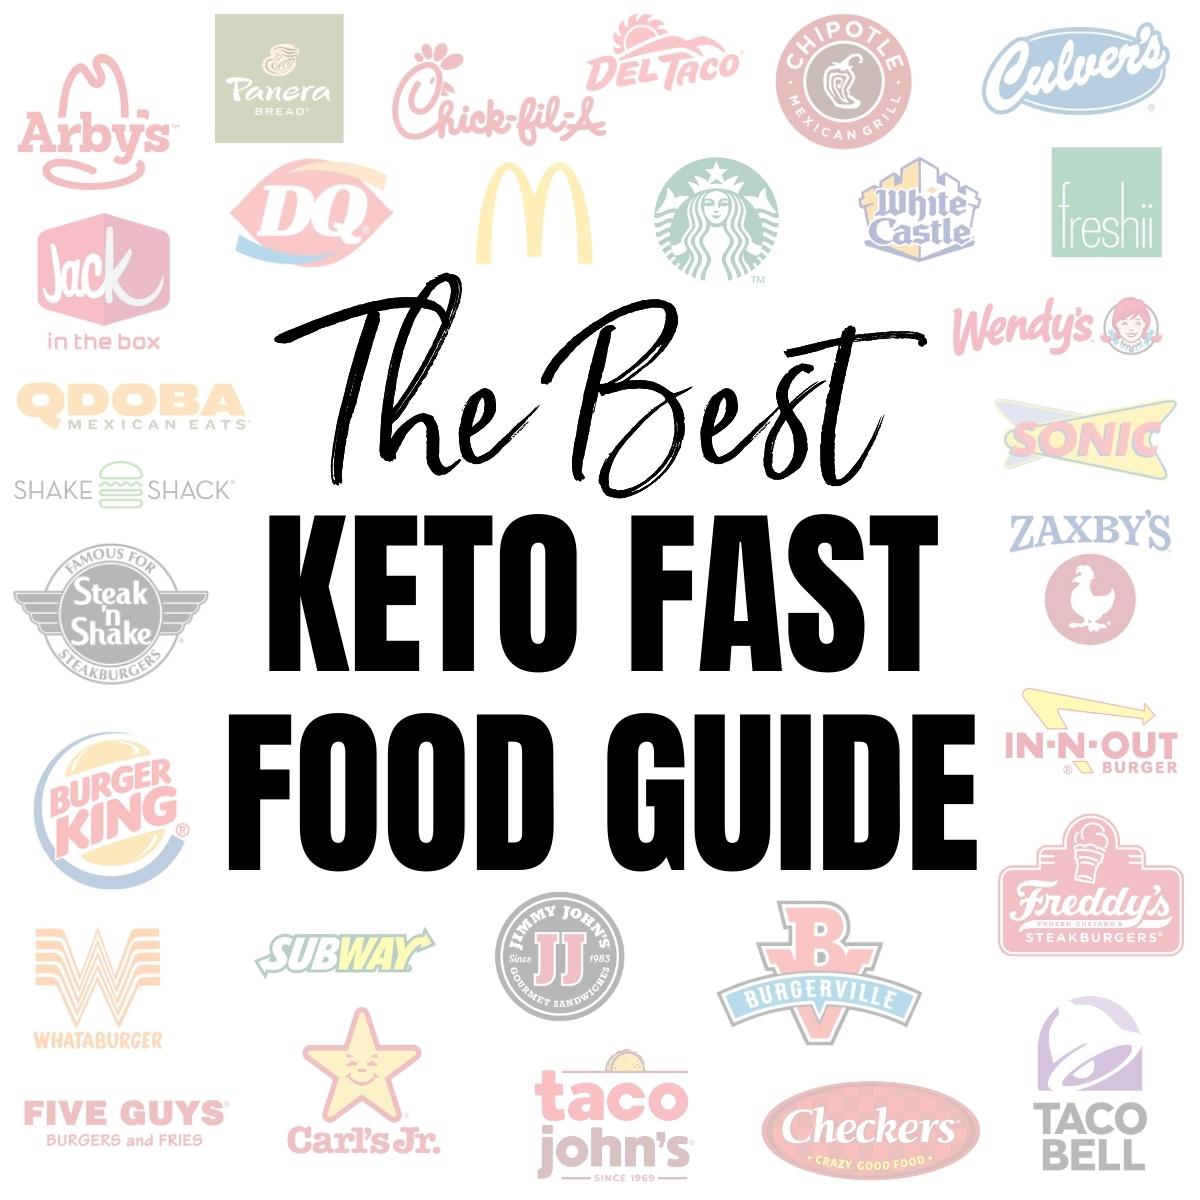 Keto fast food brands in a collage.